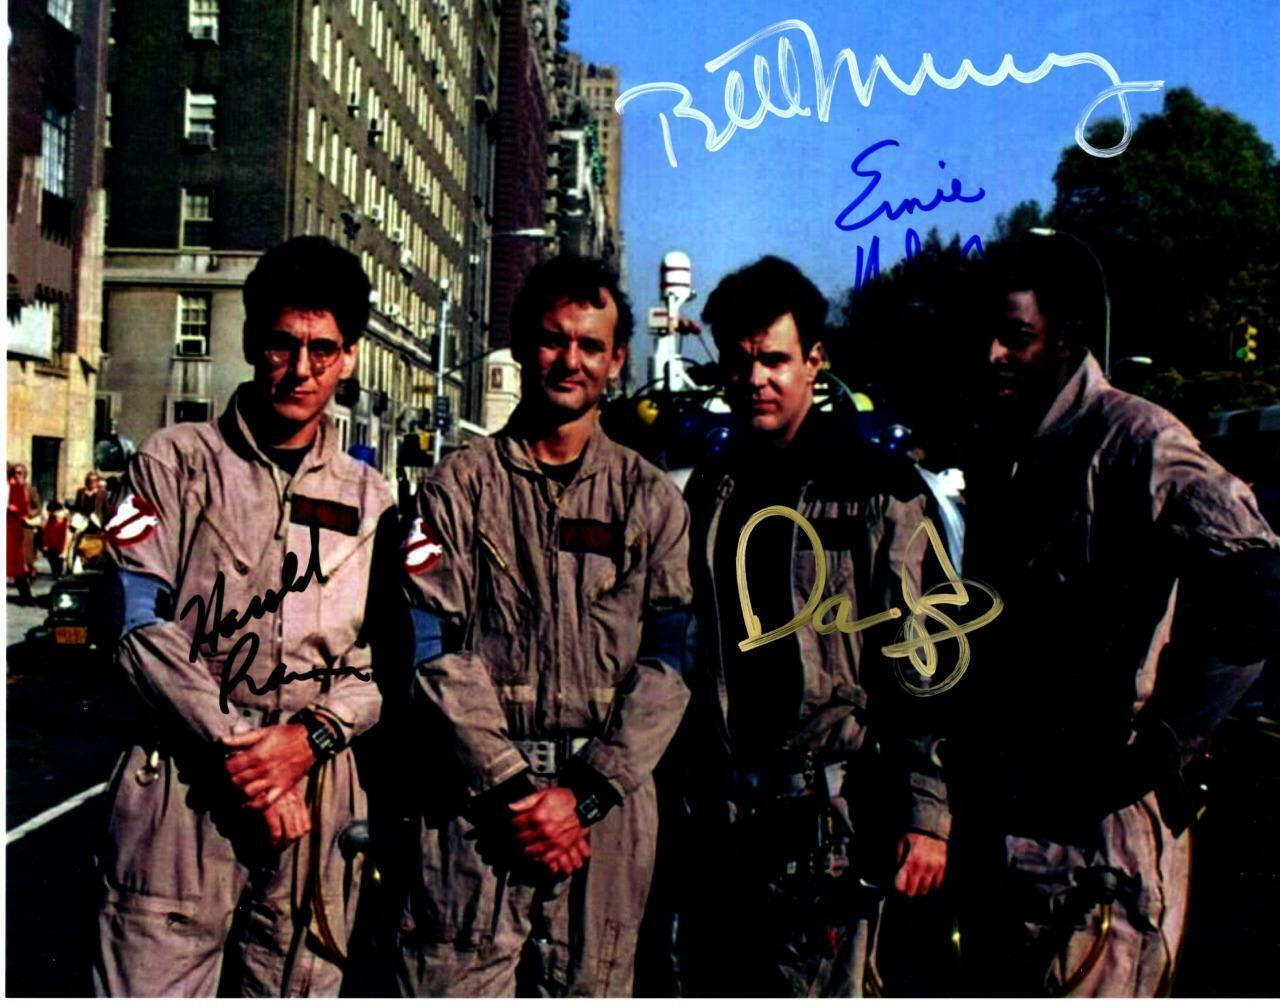 Dan Aykroyd Murray Ramis Hudson signed 11x14 Photo Poster painting Pic autographed and COA